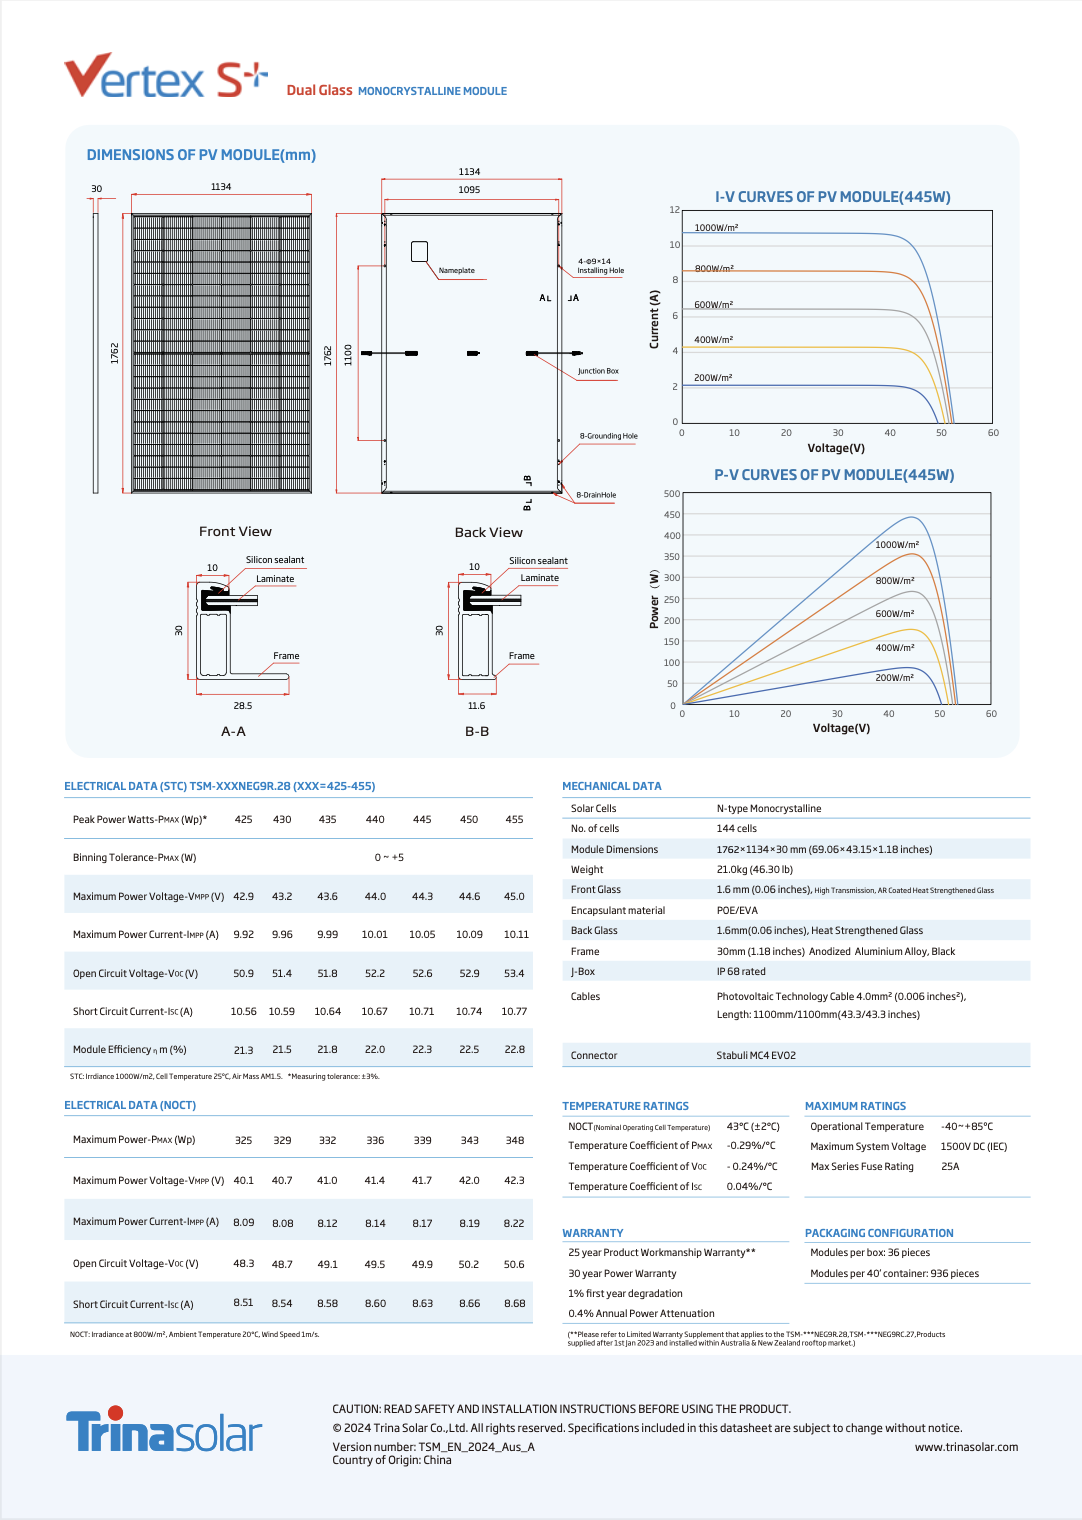 Technical specification datasheet for the Trina Solar Vertex S+ Dual Glass Monocrystalline Module. The datasheet includes detailed diagrams of the front and back views of the PV module, illustrating dimensions and components. It also features I-V and P-V curves under varying irradiance levels, showcasing the module's electrical performance. The document covers key mechanical data such as module dimensions (1762x1134x30 mm), weight (21.0 kg), and solar cell type (N-type Monocrystalline), along with electrical data, temperature ratings, maximum ratings, warranty details, and packaging configuration.